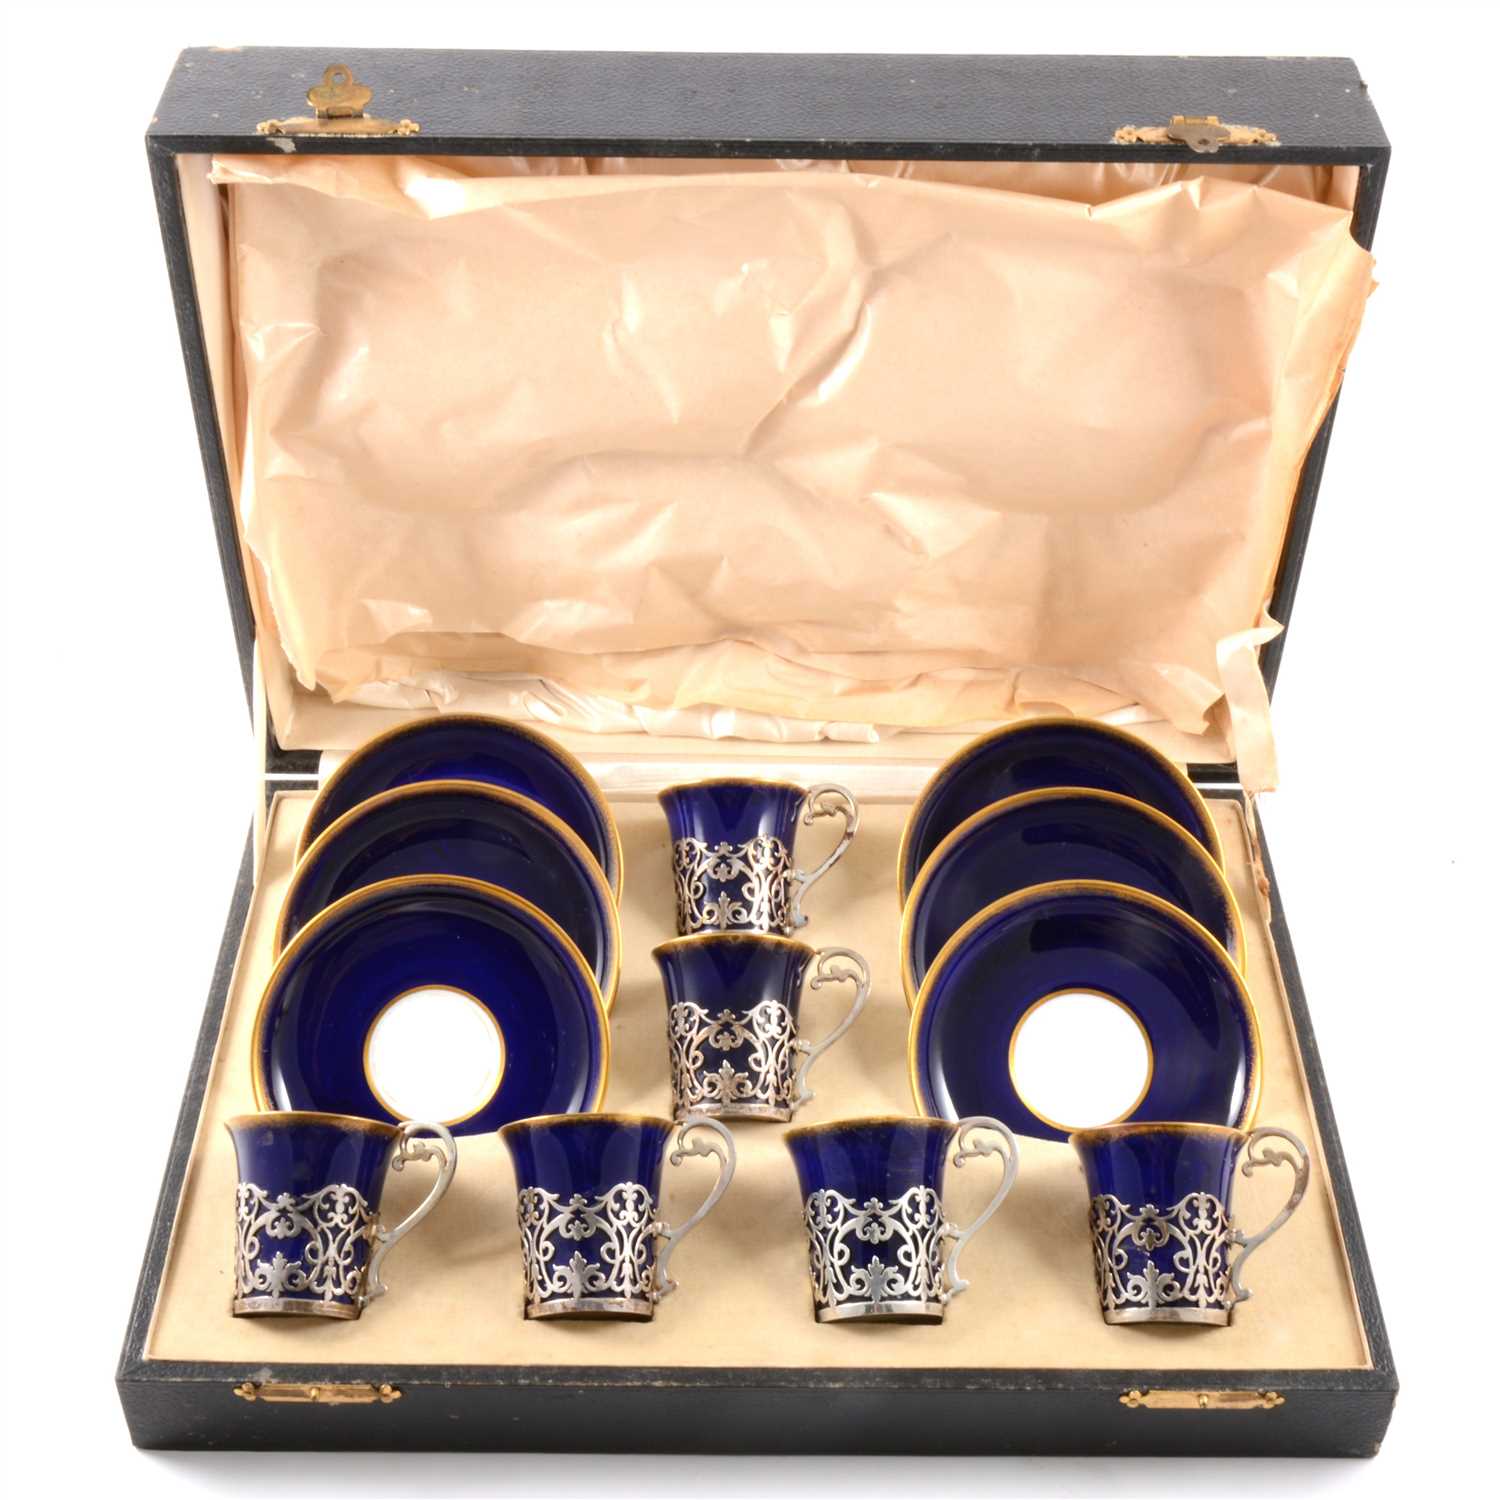 Lot 39 - A set of six Aynsley bone china coffee cans and saucers, the cans with silver frames